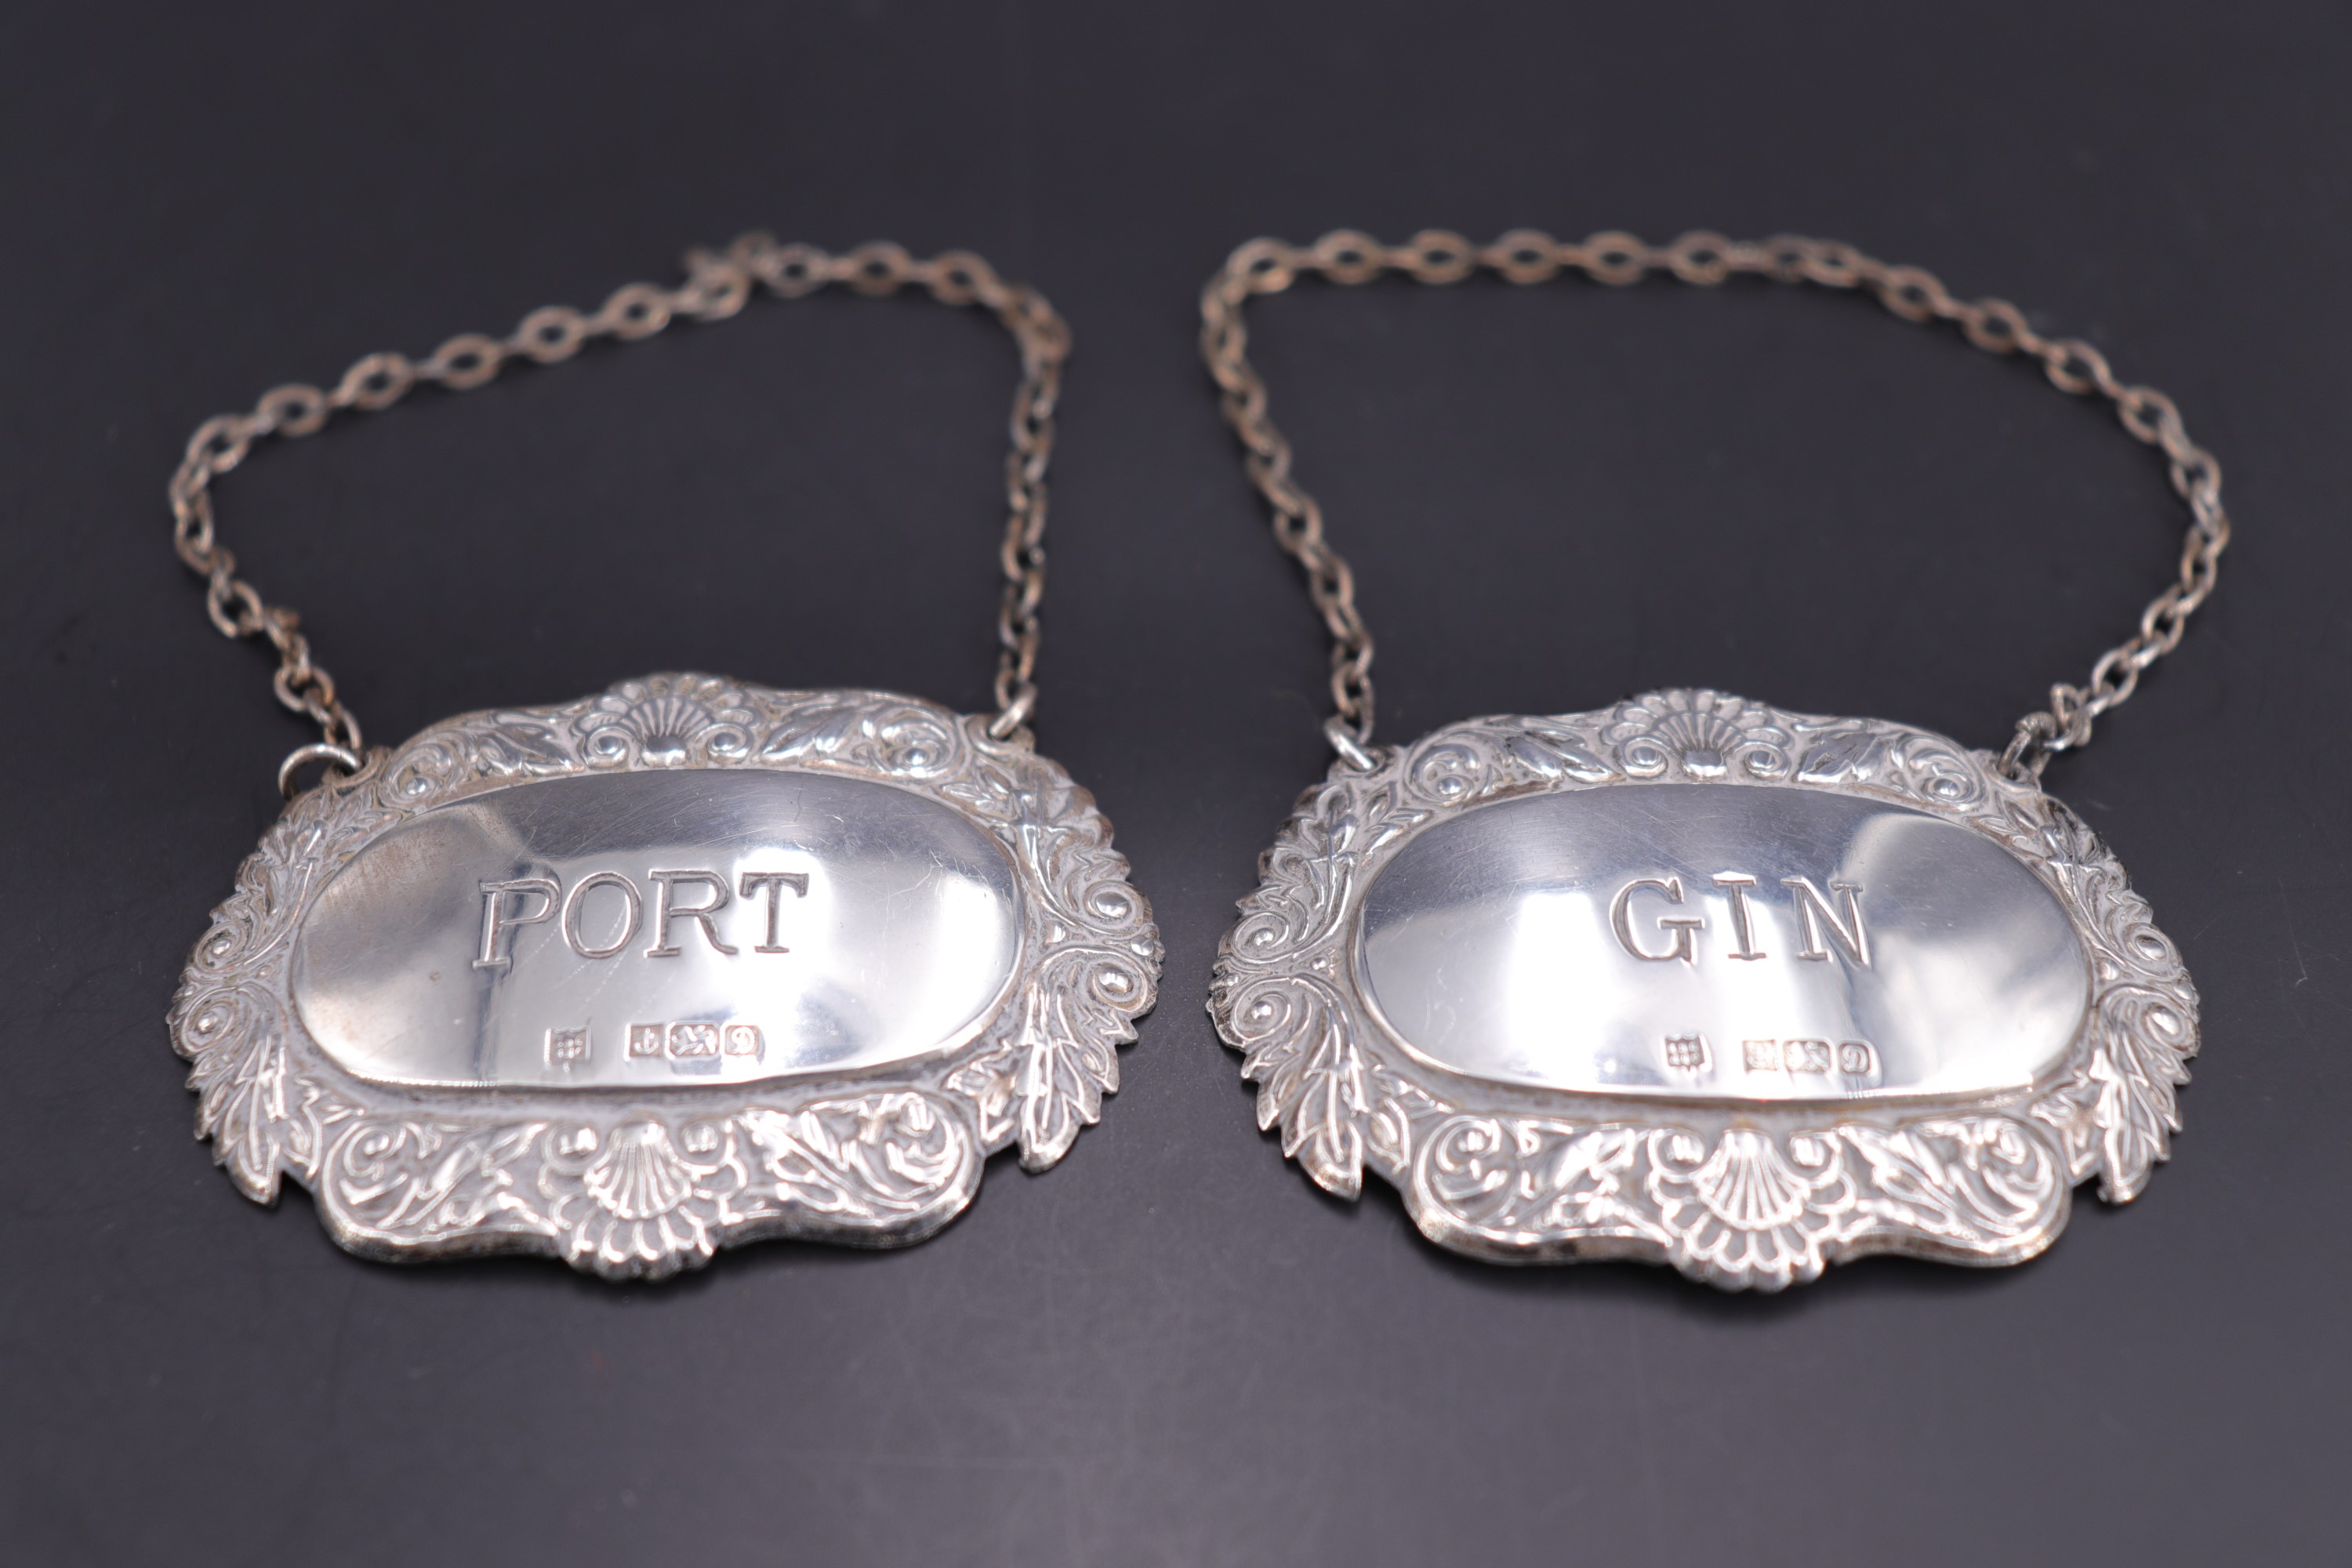 QEII silver bottle tickets, respectively for gin and port decanters